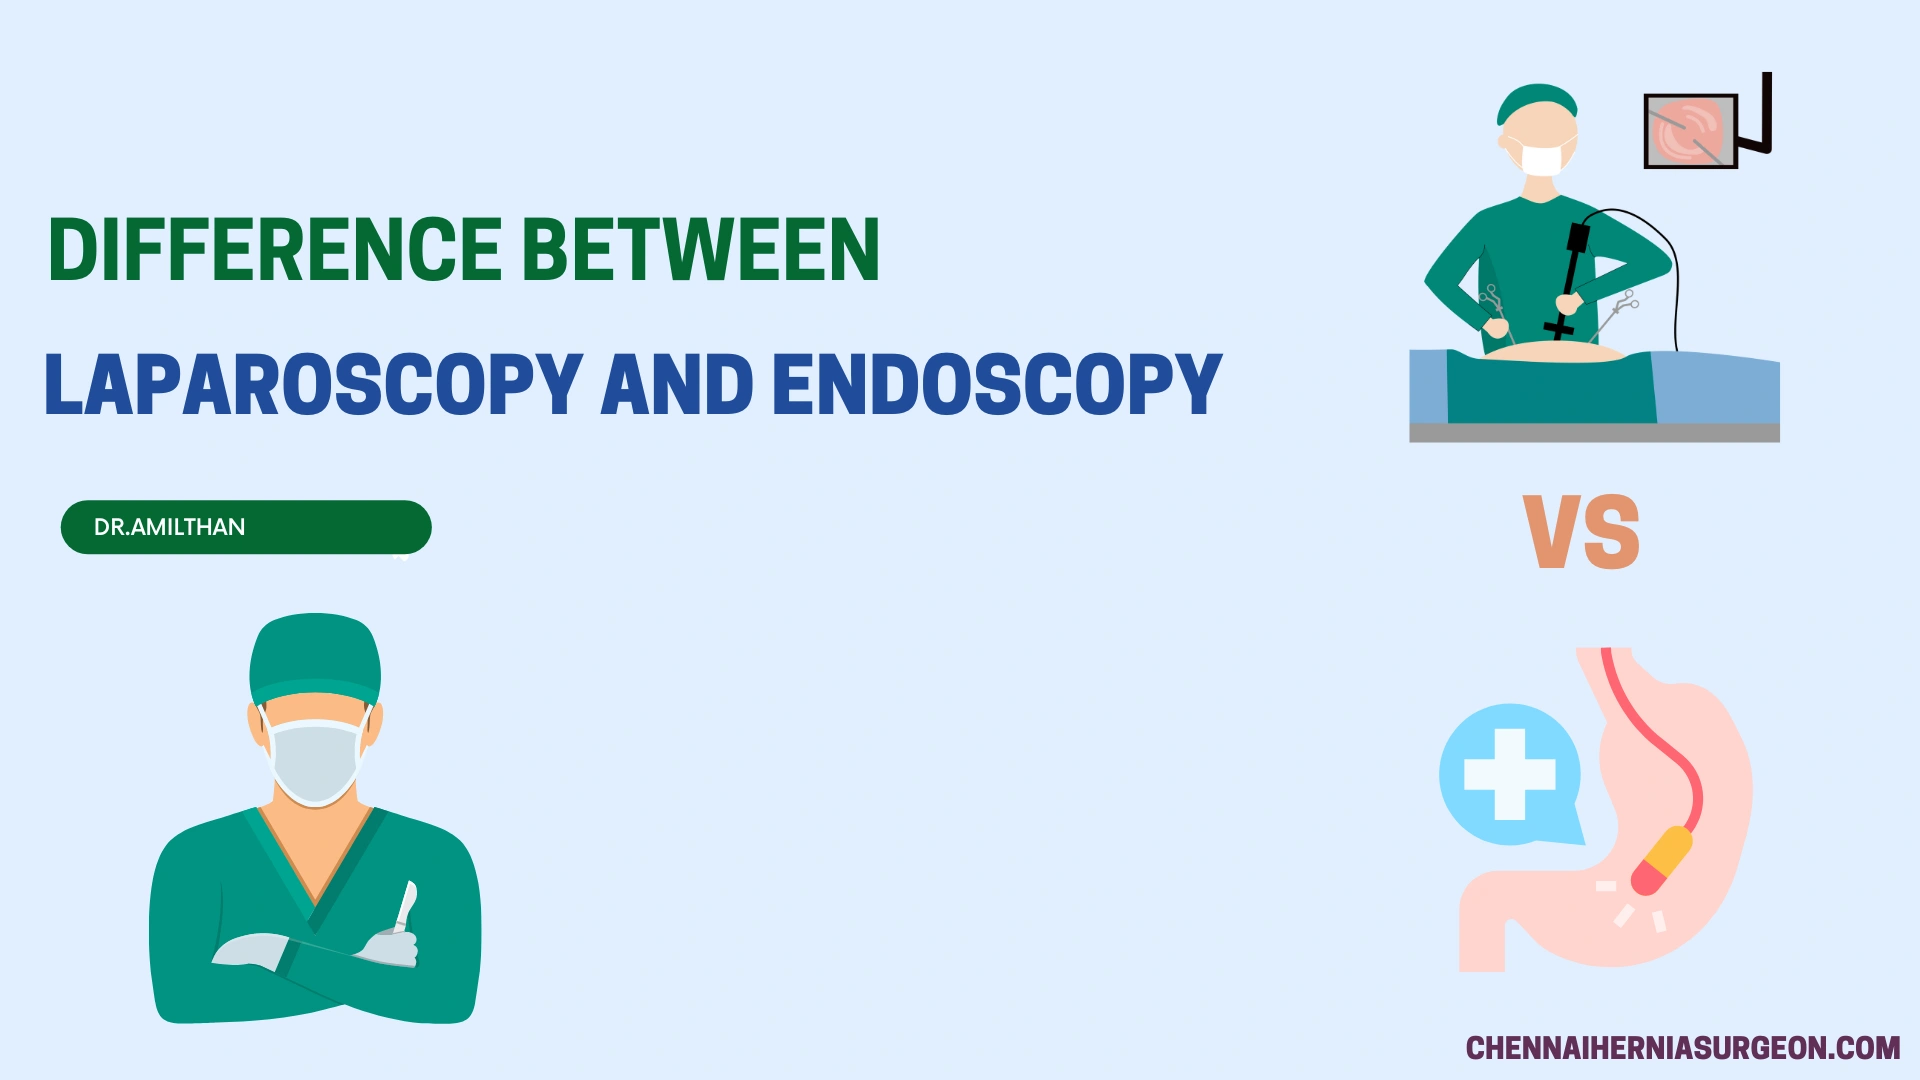 Difference between Laparoscopy and Endoscopy